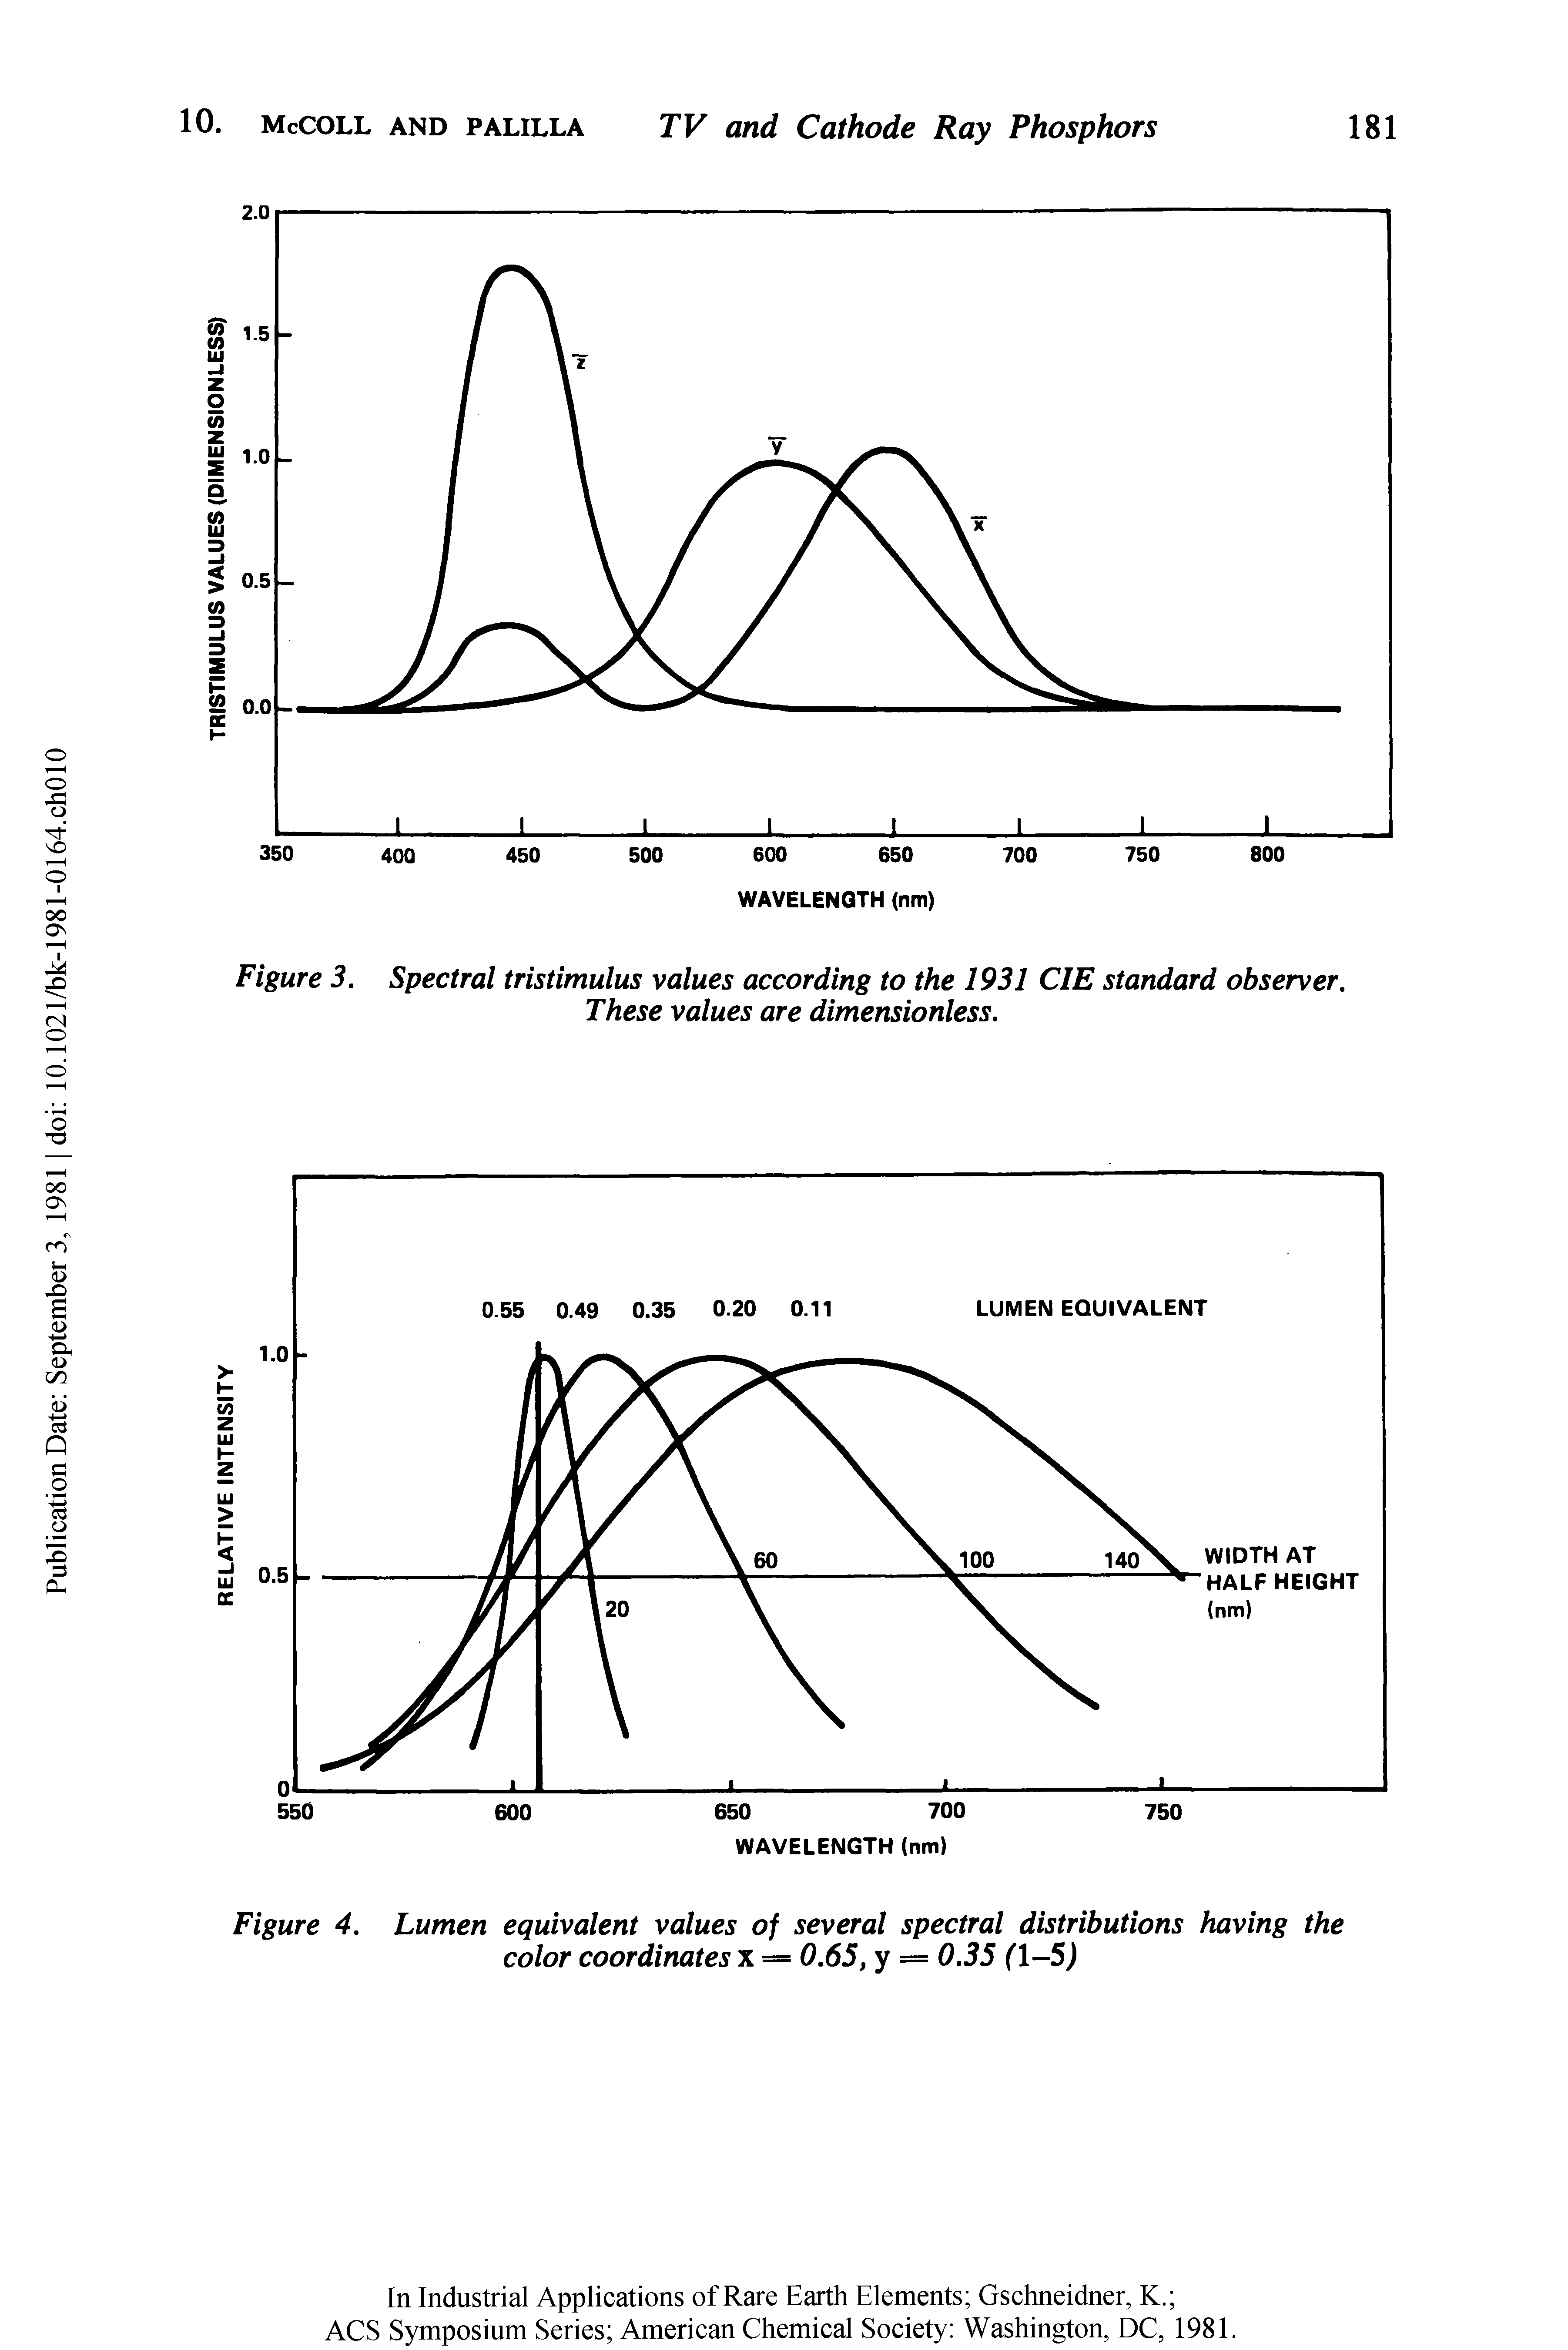 Figure 3. Spectral tristimulus values according to the 1931 CIE standard observer. These values are dimensionless.